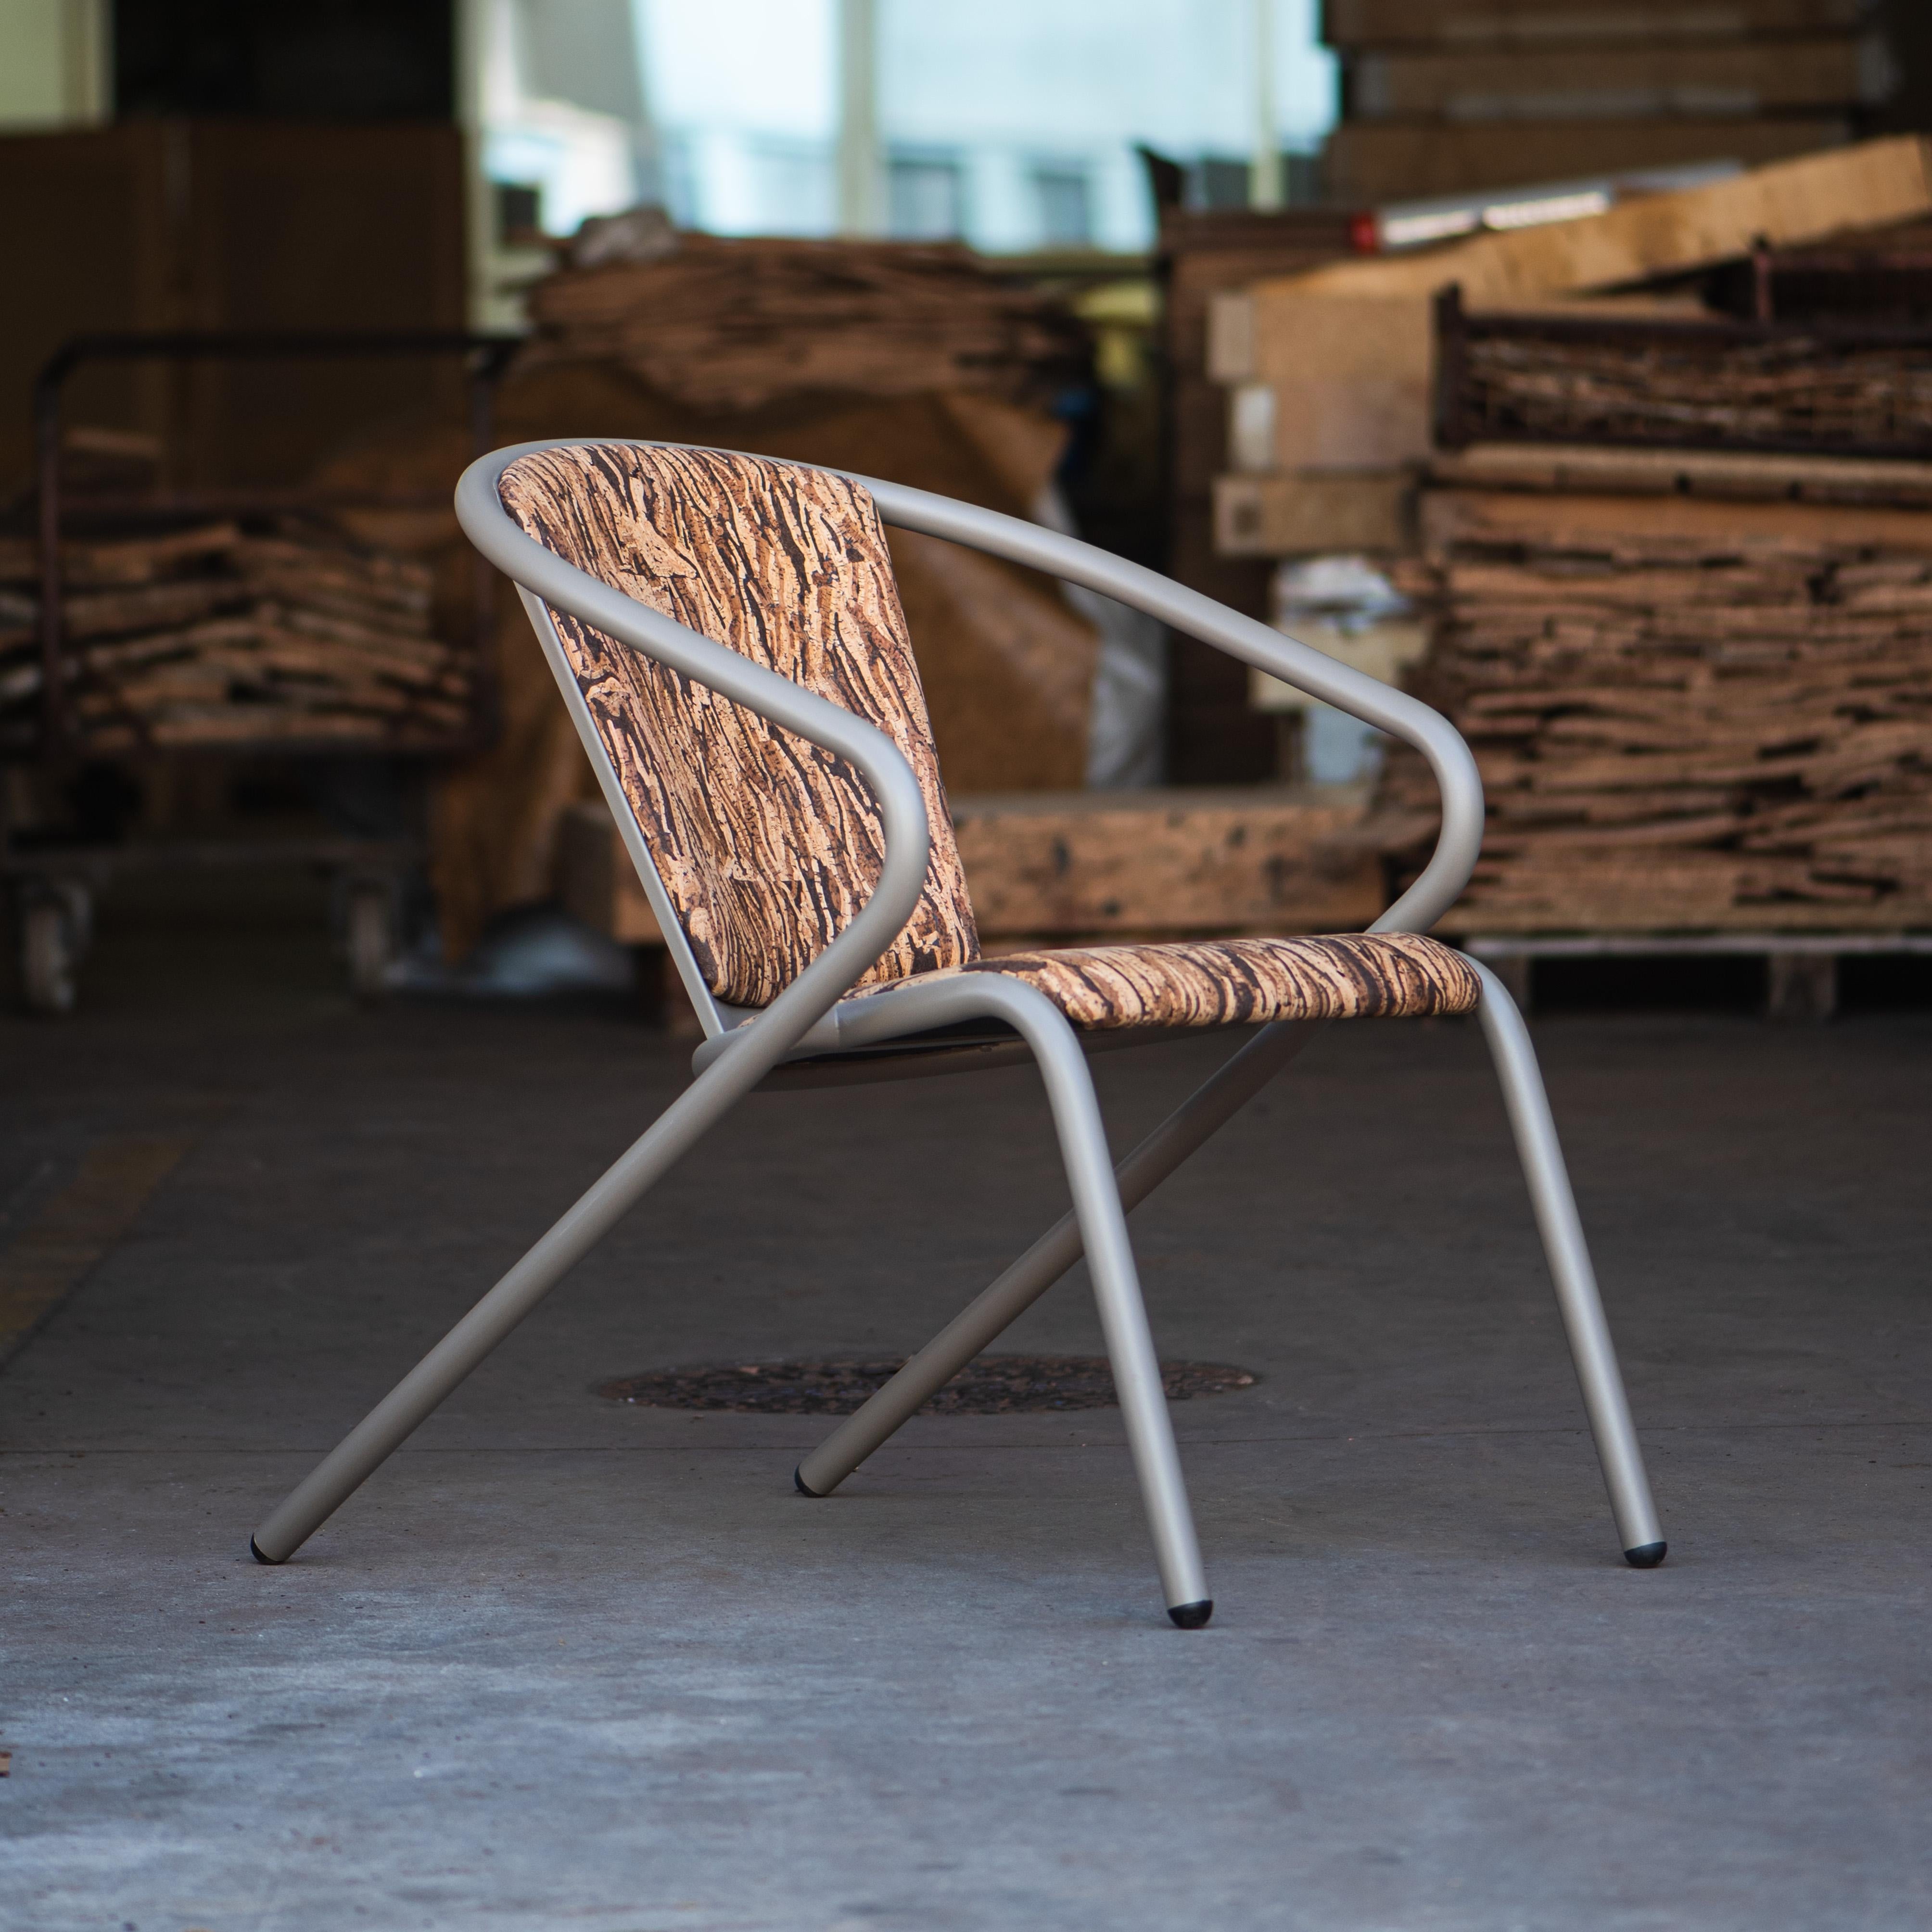 Bicalounge Modern Steel Lounge Chair Oxidized Bark, Upholstery in Natural Cork In New Condition For Sale In Agualva-Cacém, PT